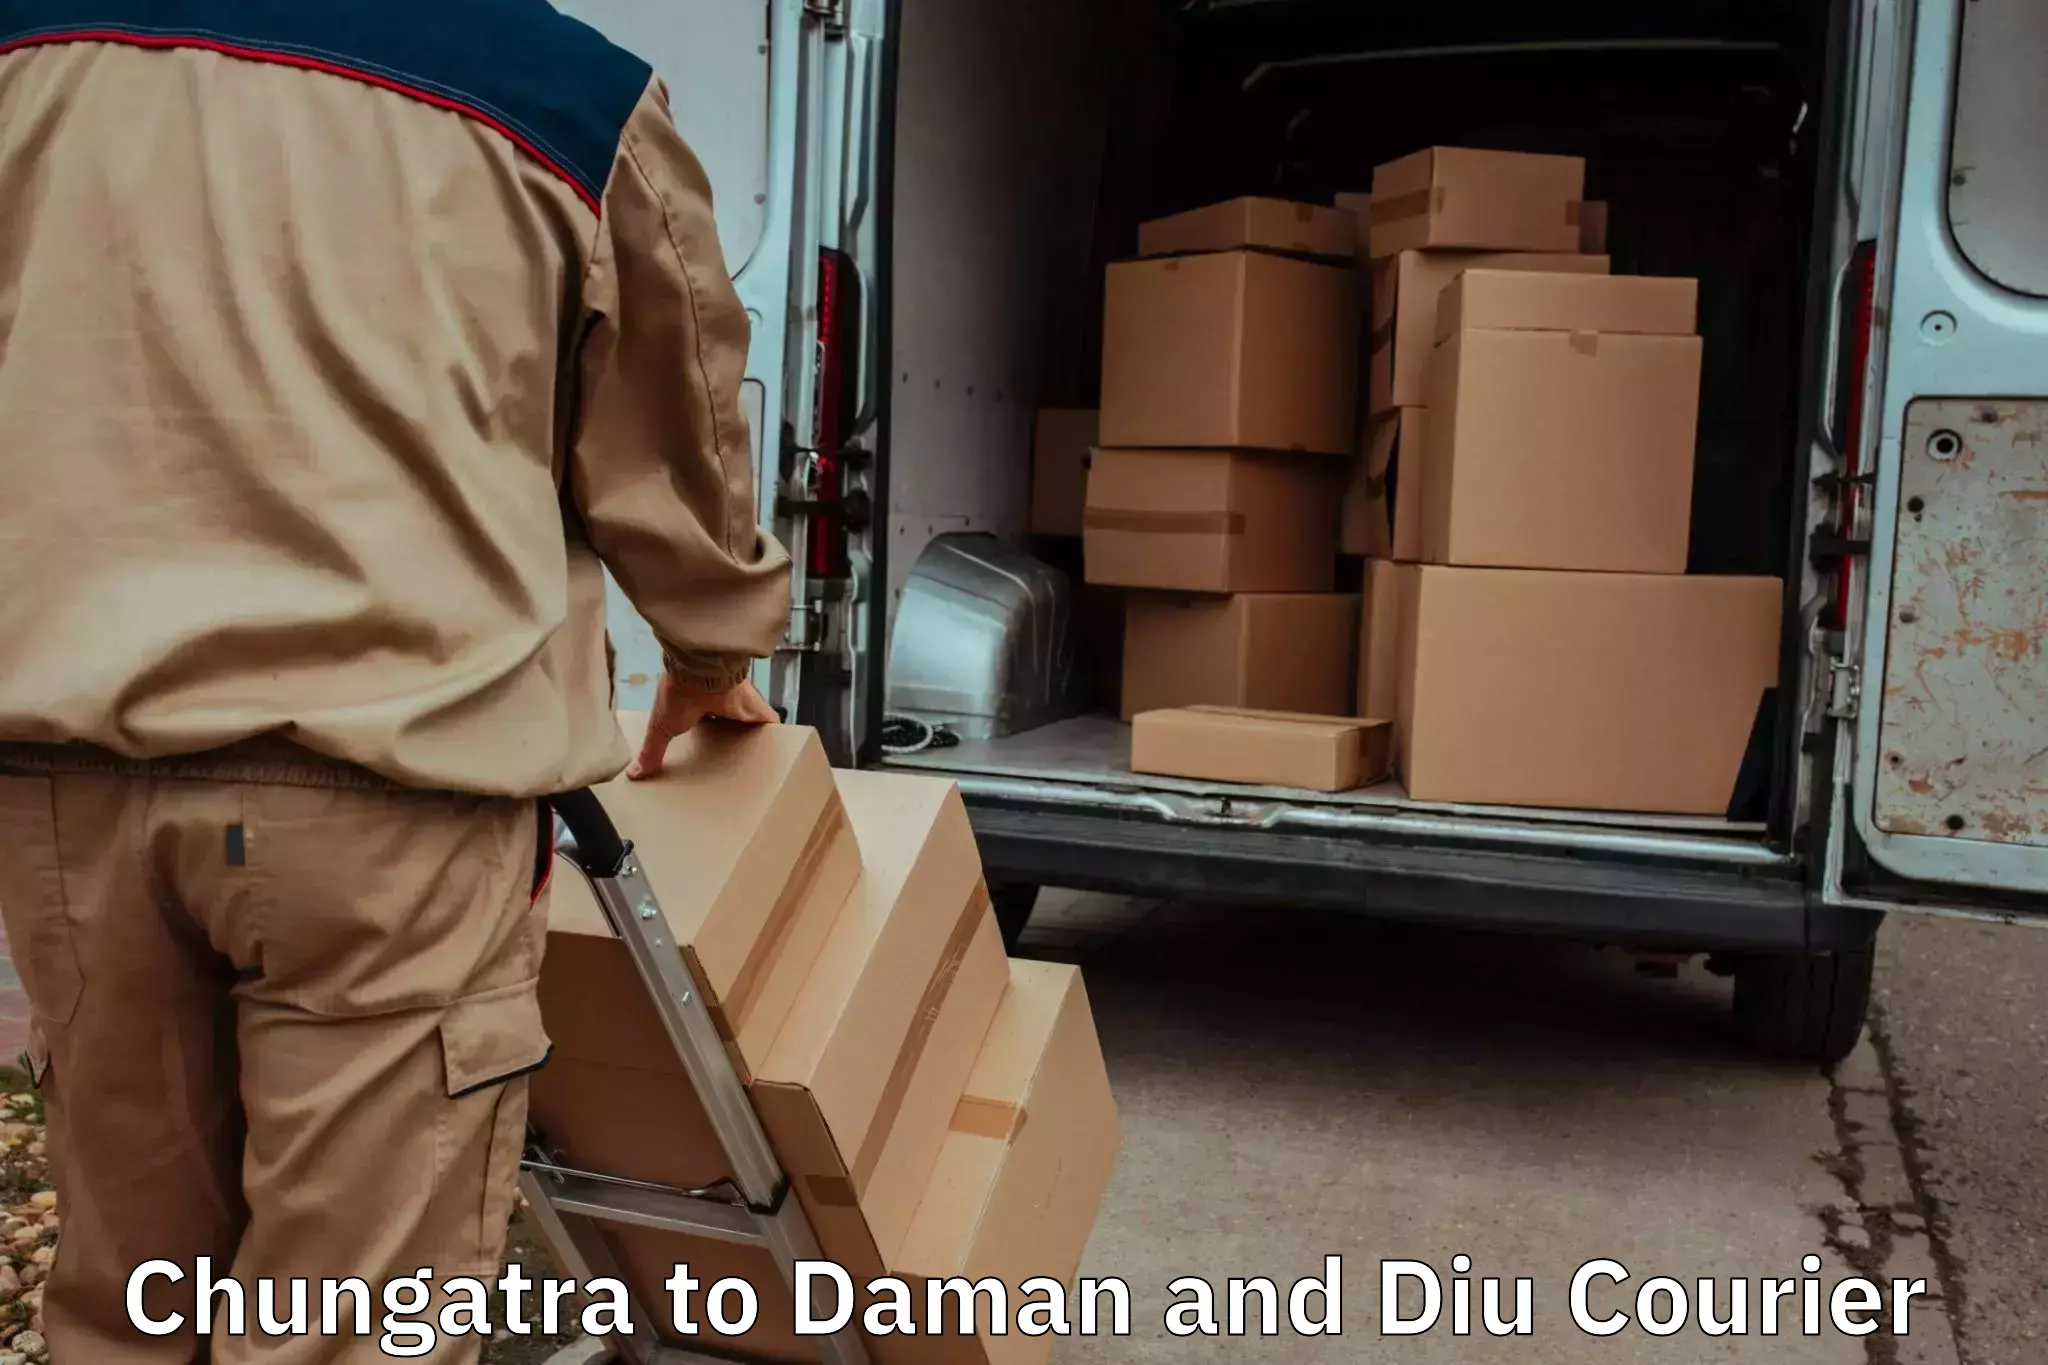 Trusted relocation experts Chungatra to Daman and Diu